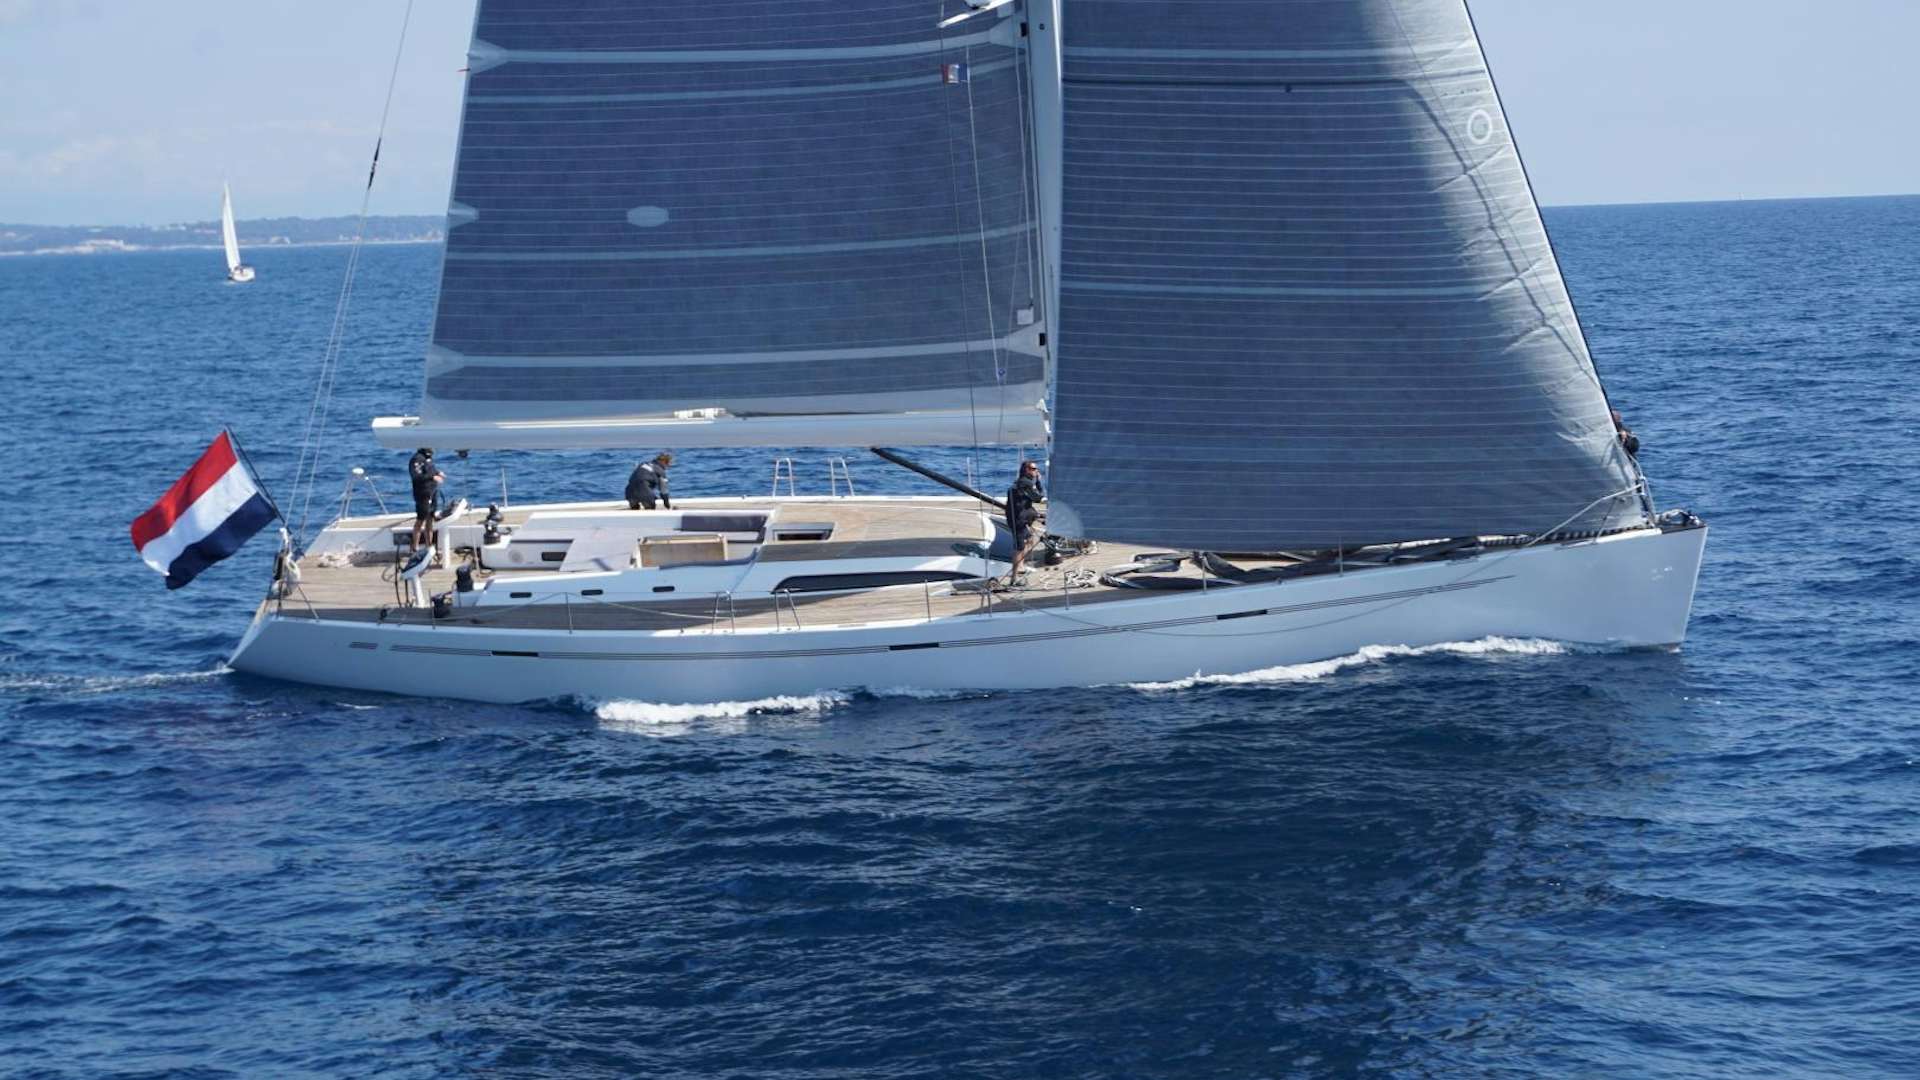 Watch Video for XERES Yacht for Sale